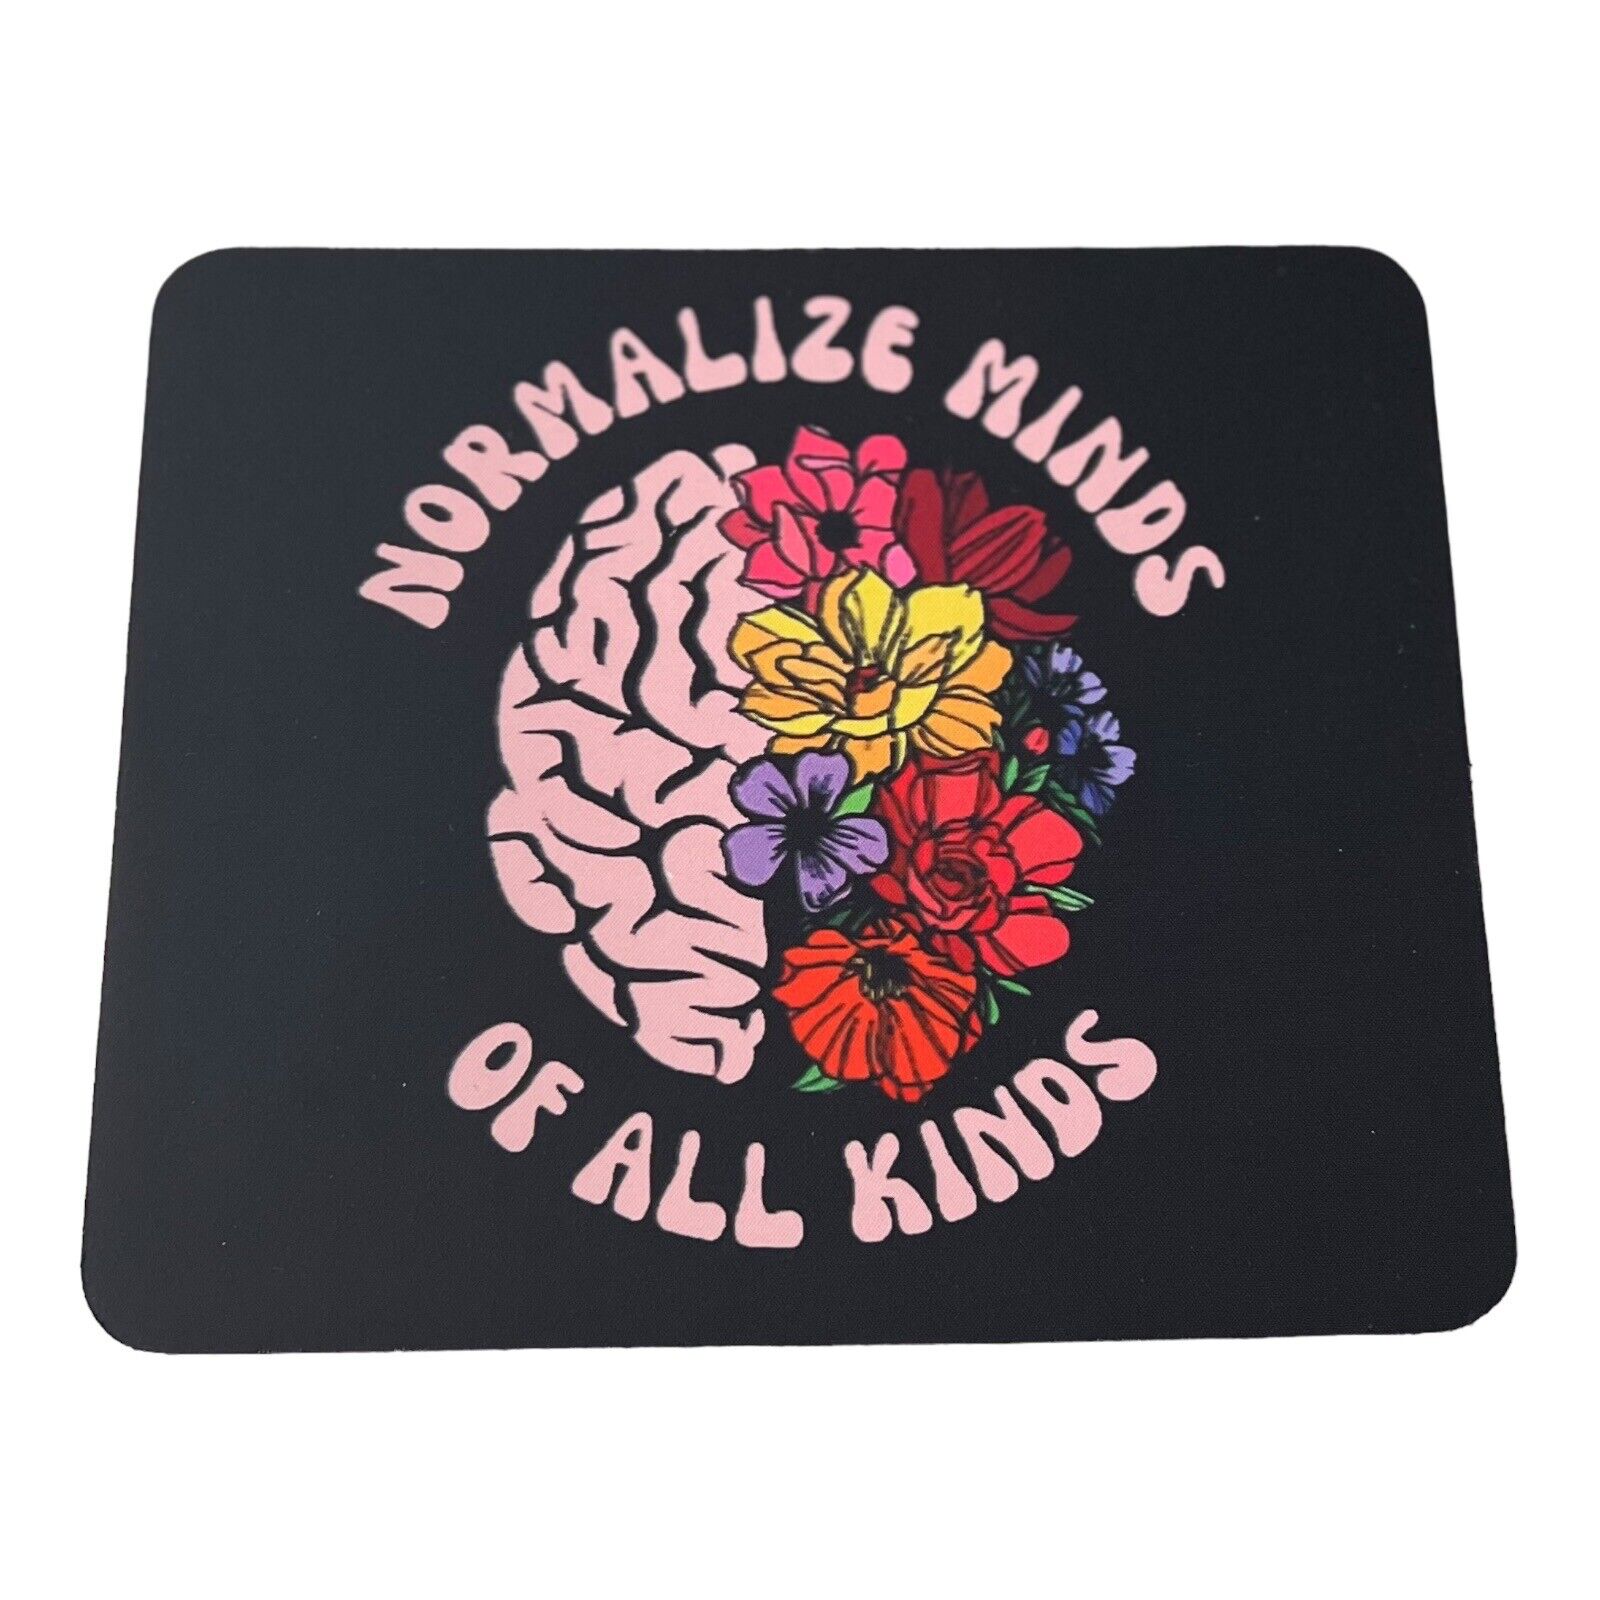 Normalize Minds Of All Kinds -Mouse Pad 8 X 9.5 Inches